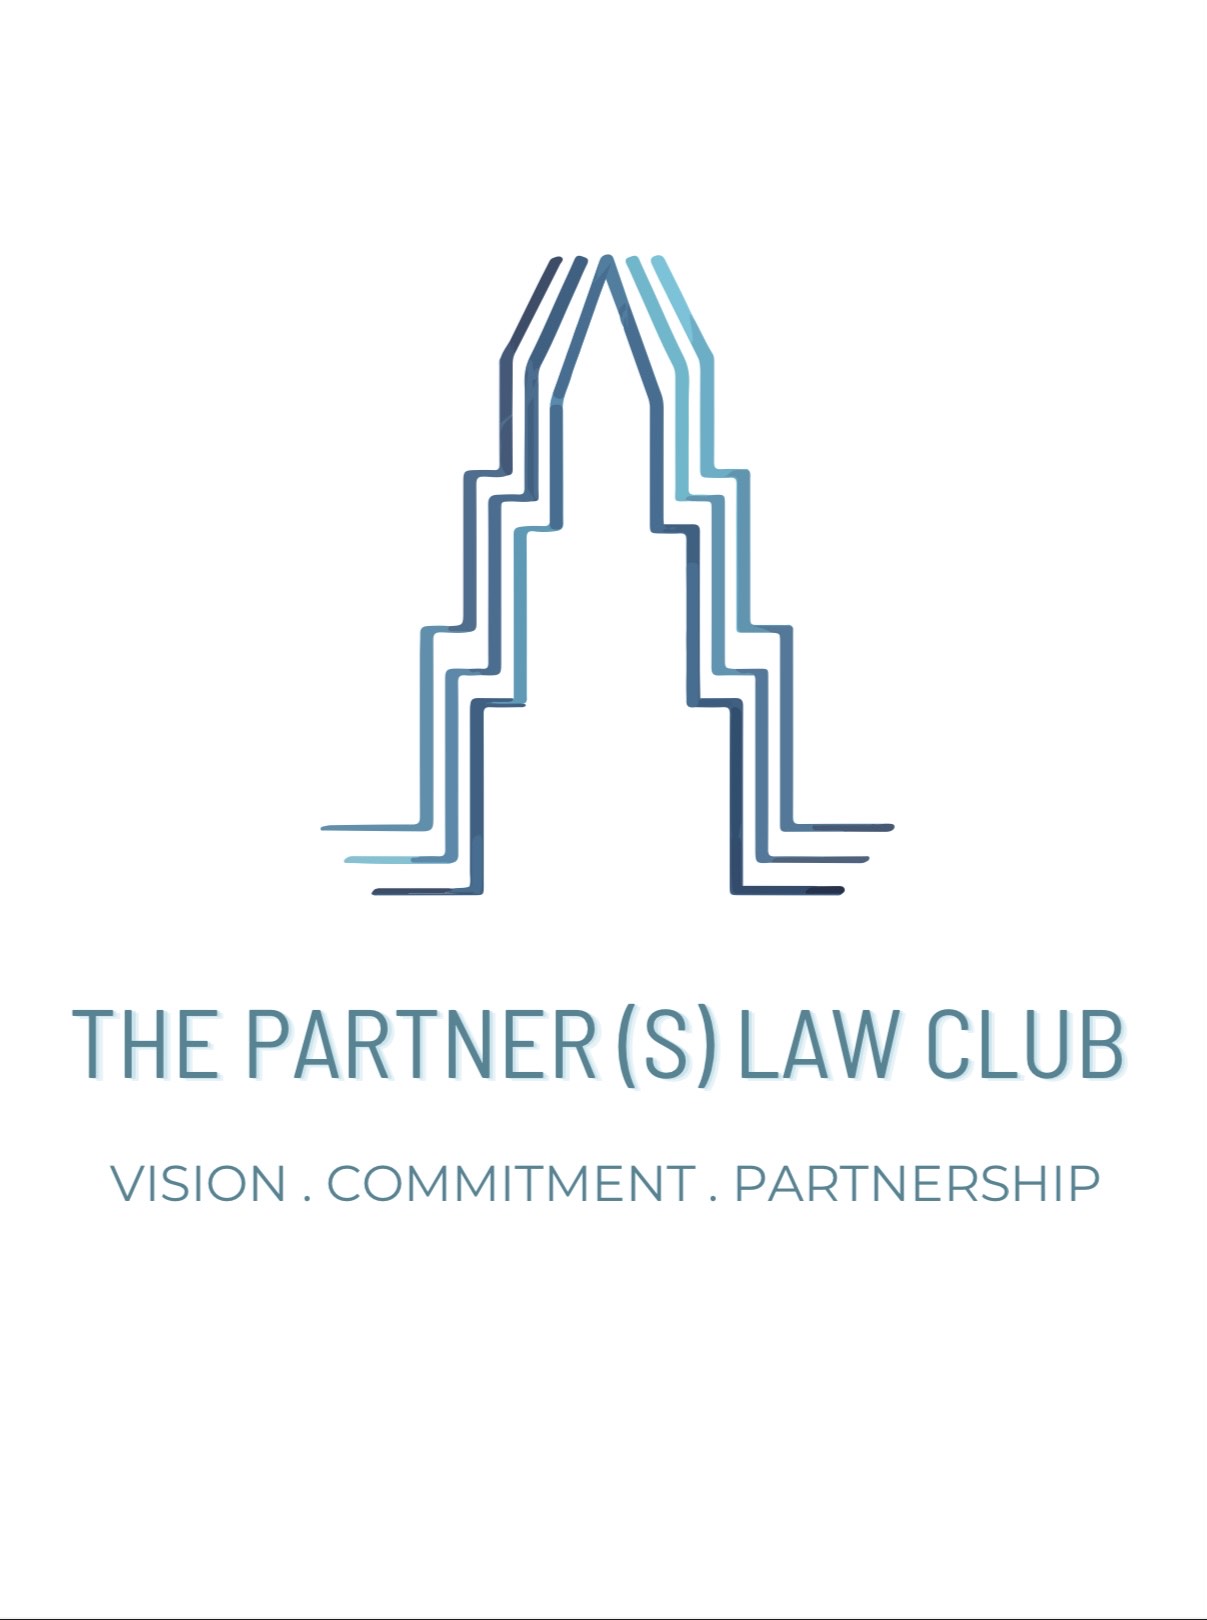 The Partner Law Club